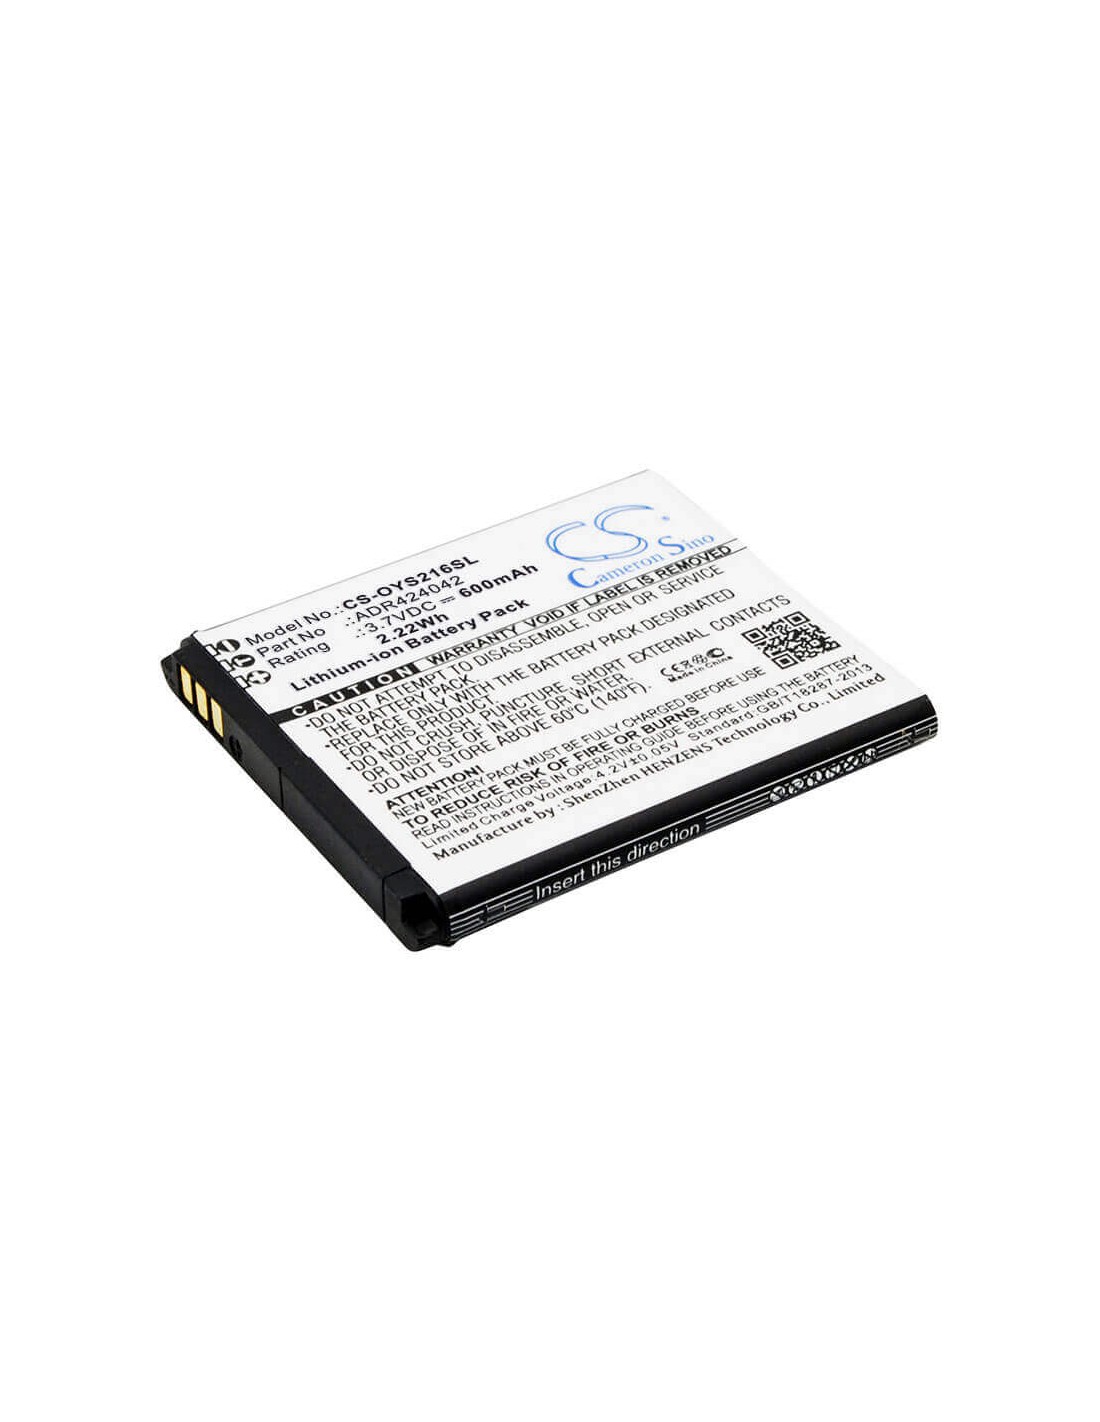 Battery for Olympia Style, Style 2164, Style 2165 3.7V, 800mAh - 2.96Wh